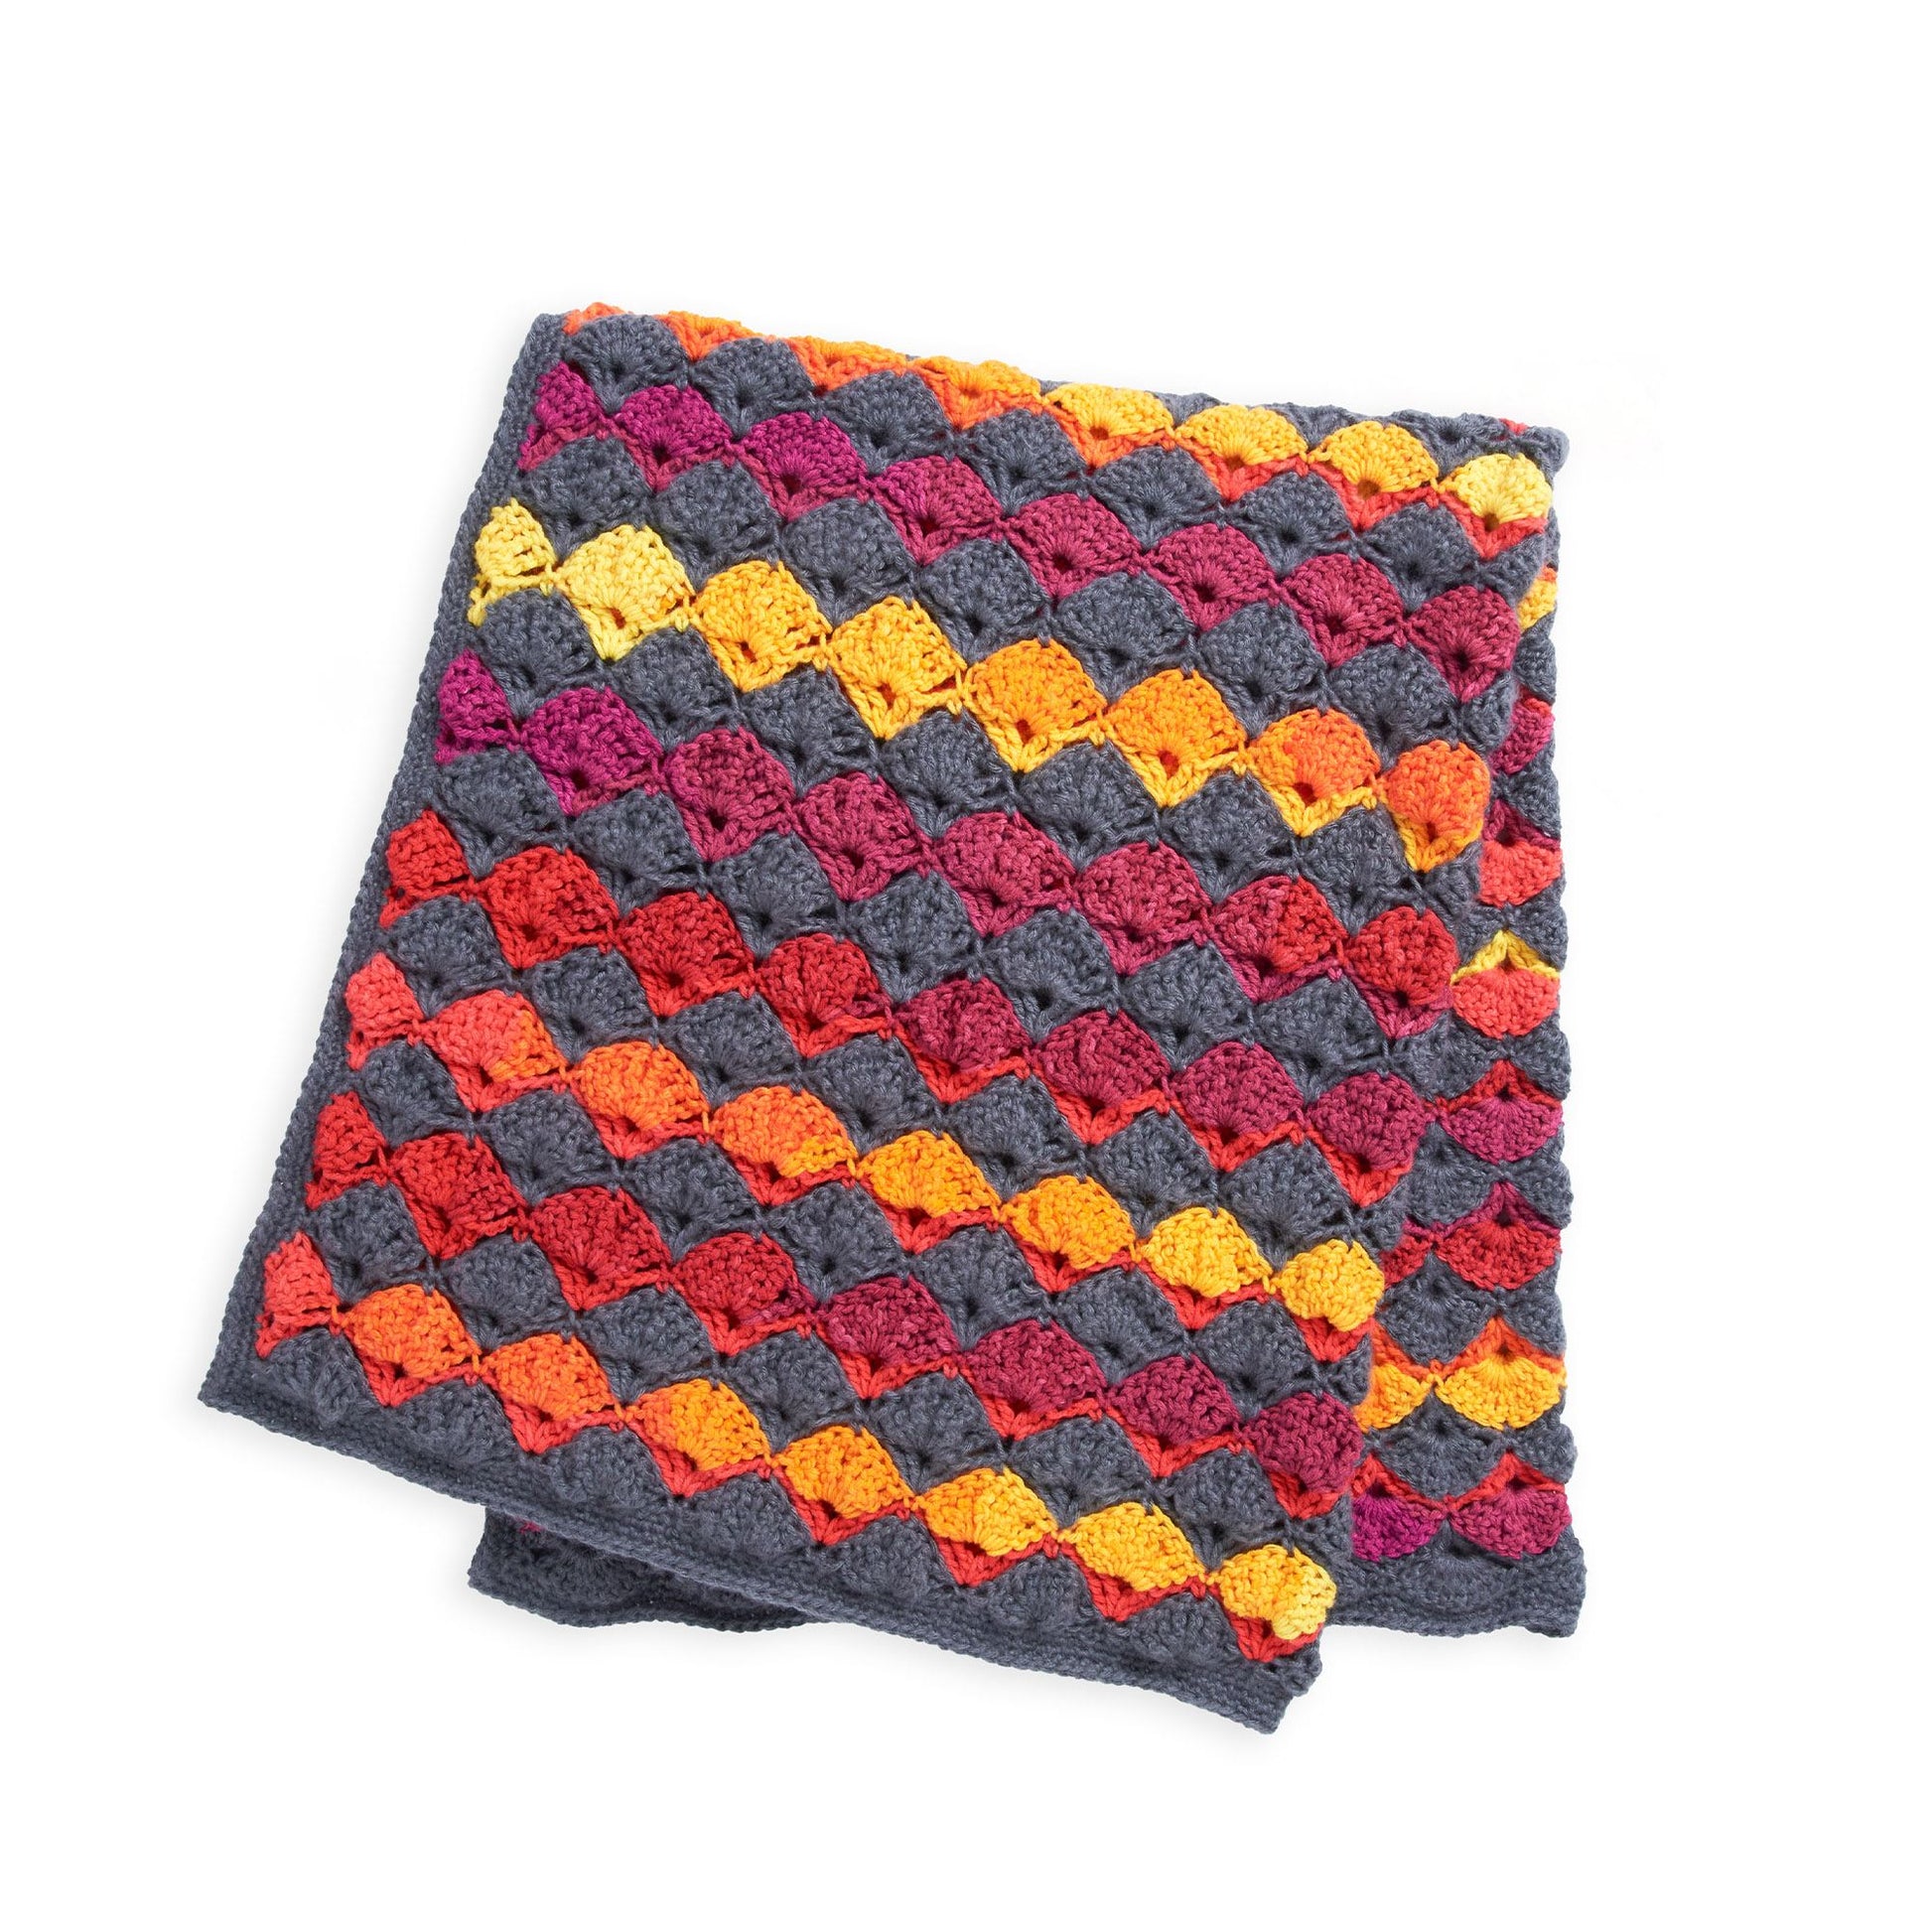 Free Red Heart Pixel Perfect Crochet Afghan Pattern